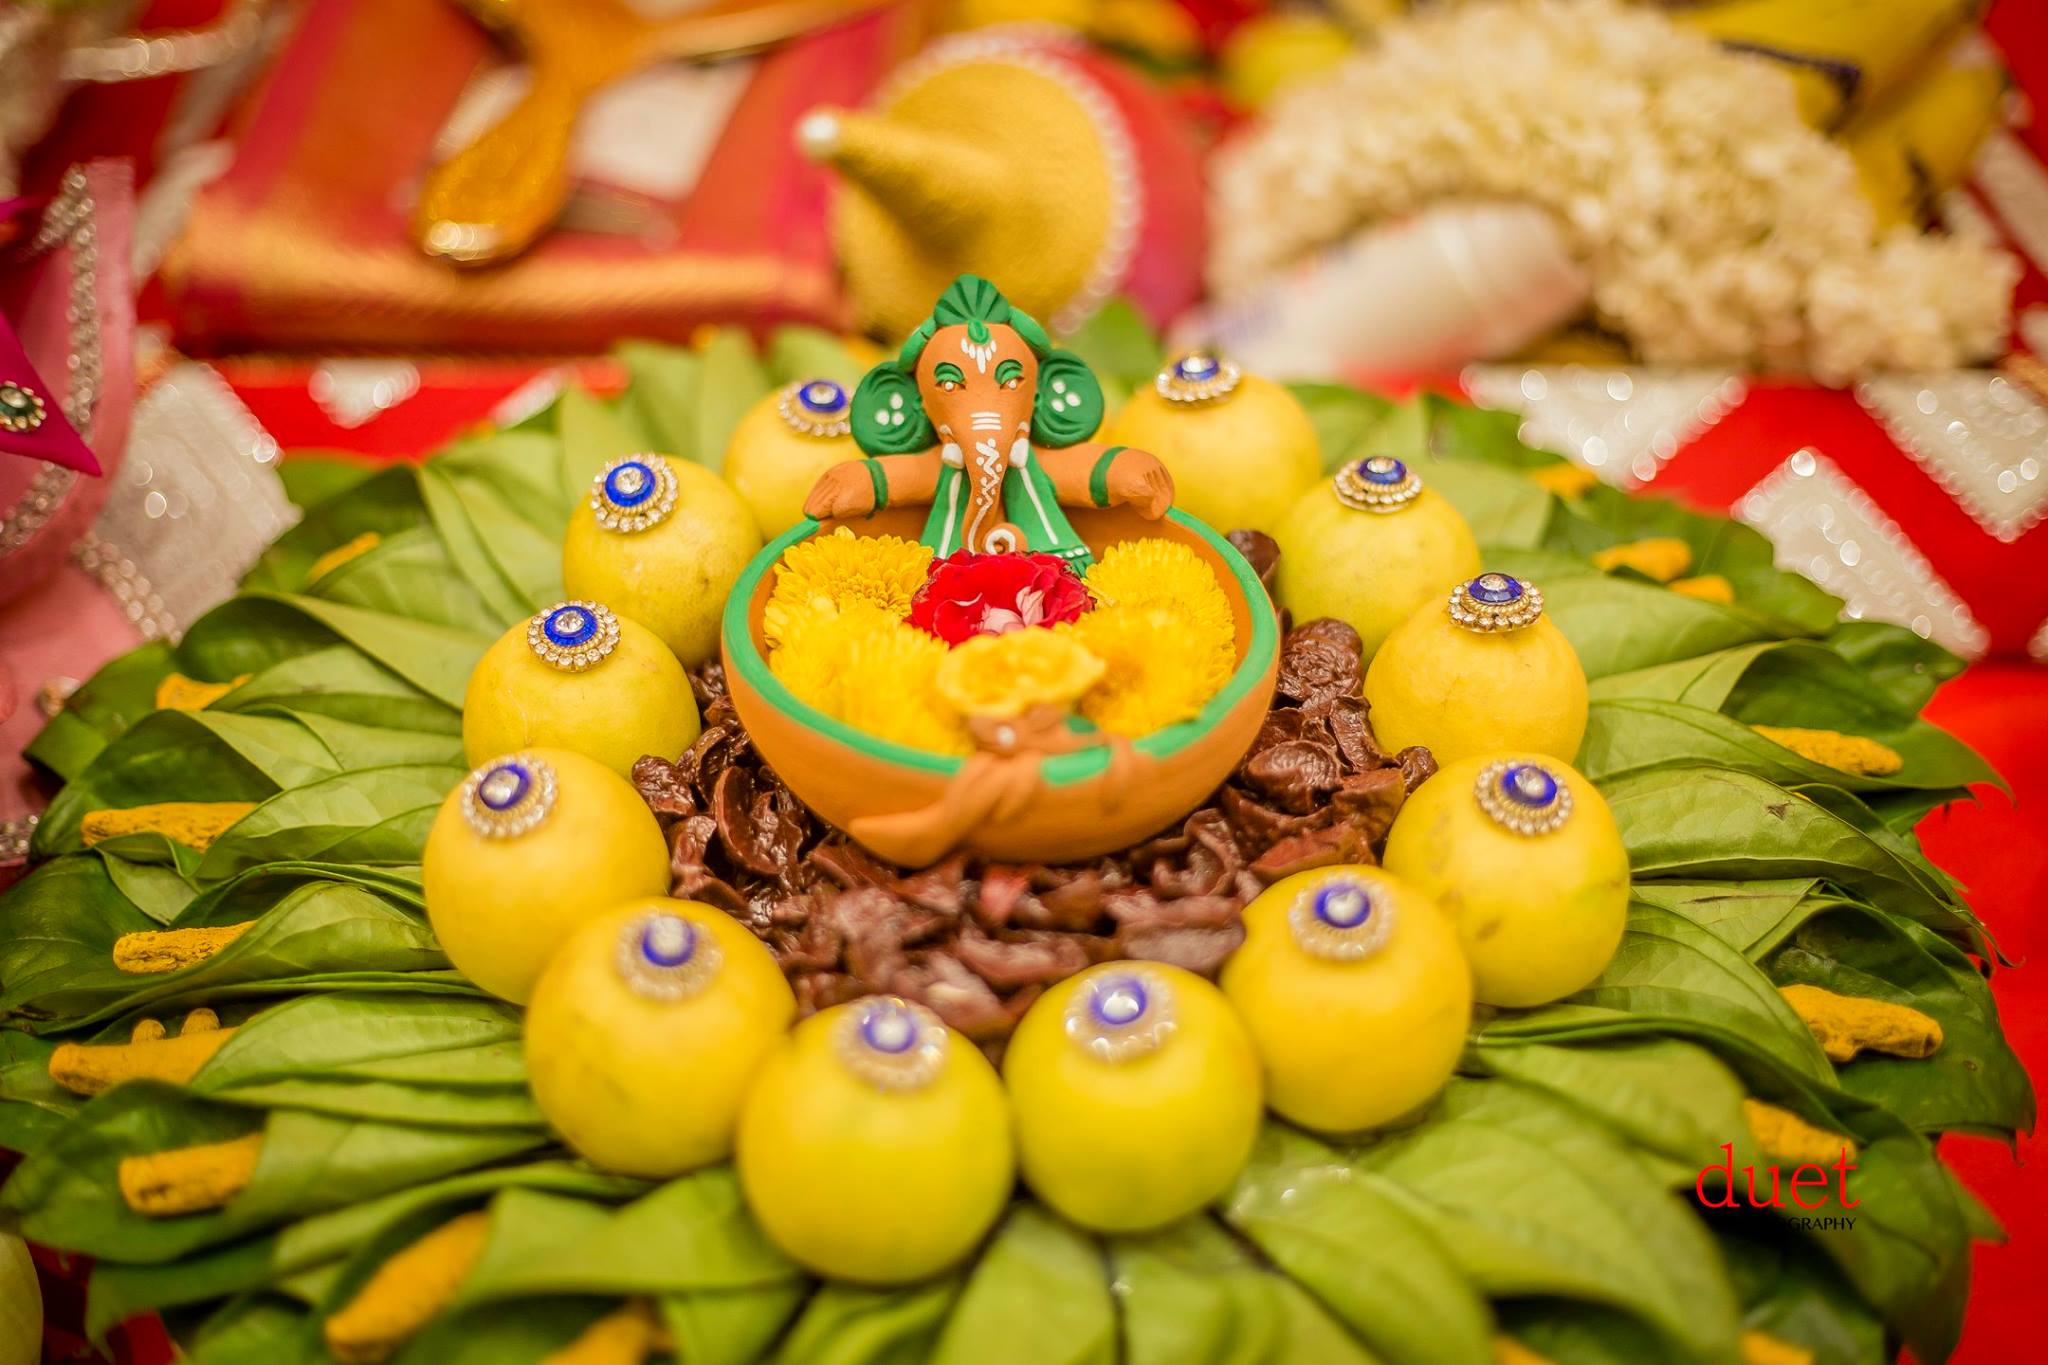 Ganesa in the middle of decorated oranges